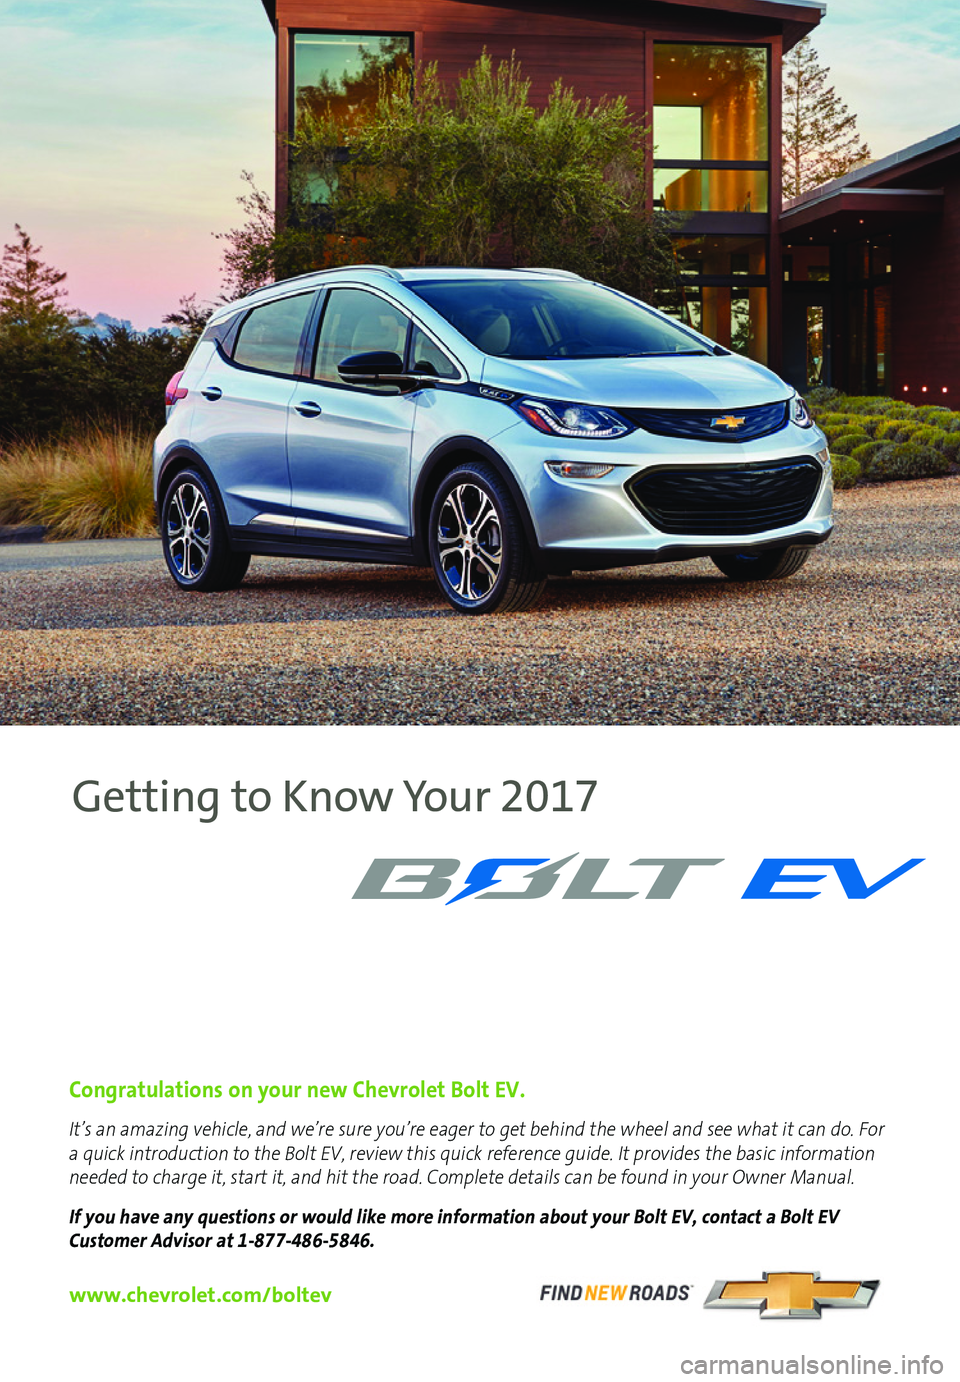 CHEVROLET BOLT EV 2017  Owners Manual 1
Pantone Spot ColorsPantone300 C
Pantone
Cool
Gray 7C
Congratulations on your new Chevrolet Bolt EV.
www.chevrolet.com/boltev
It’s an amazing vehicle, and we’re sure you’re eager to get behind 